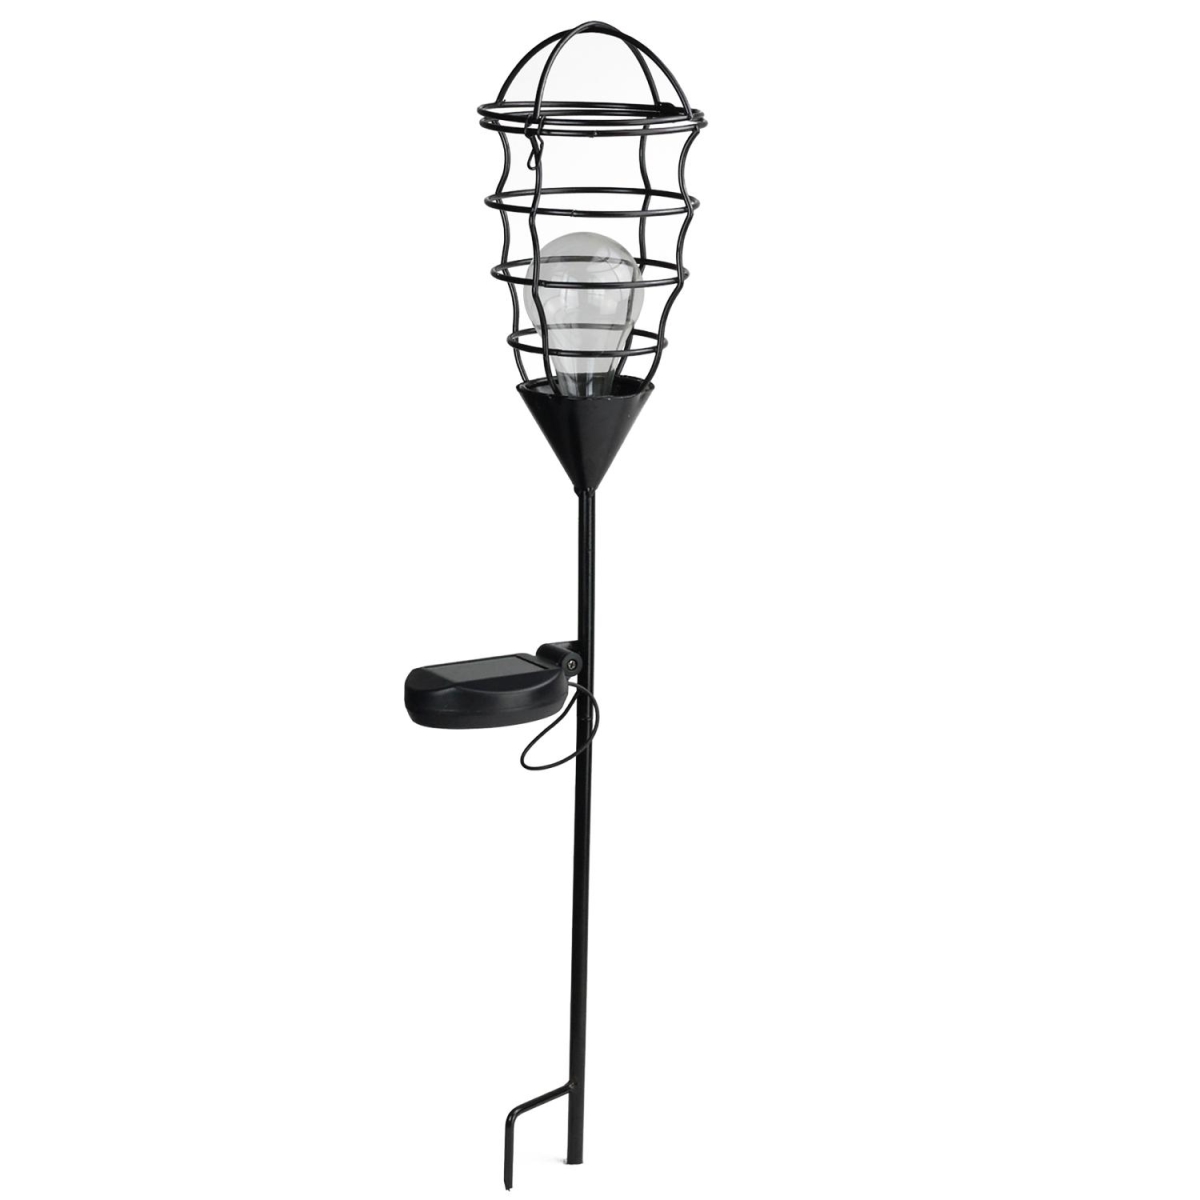 32590315 23.5 In. Black Geometric Solar Powered Led Outdoor Patio Metal Lantern With Garden Stake